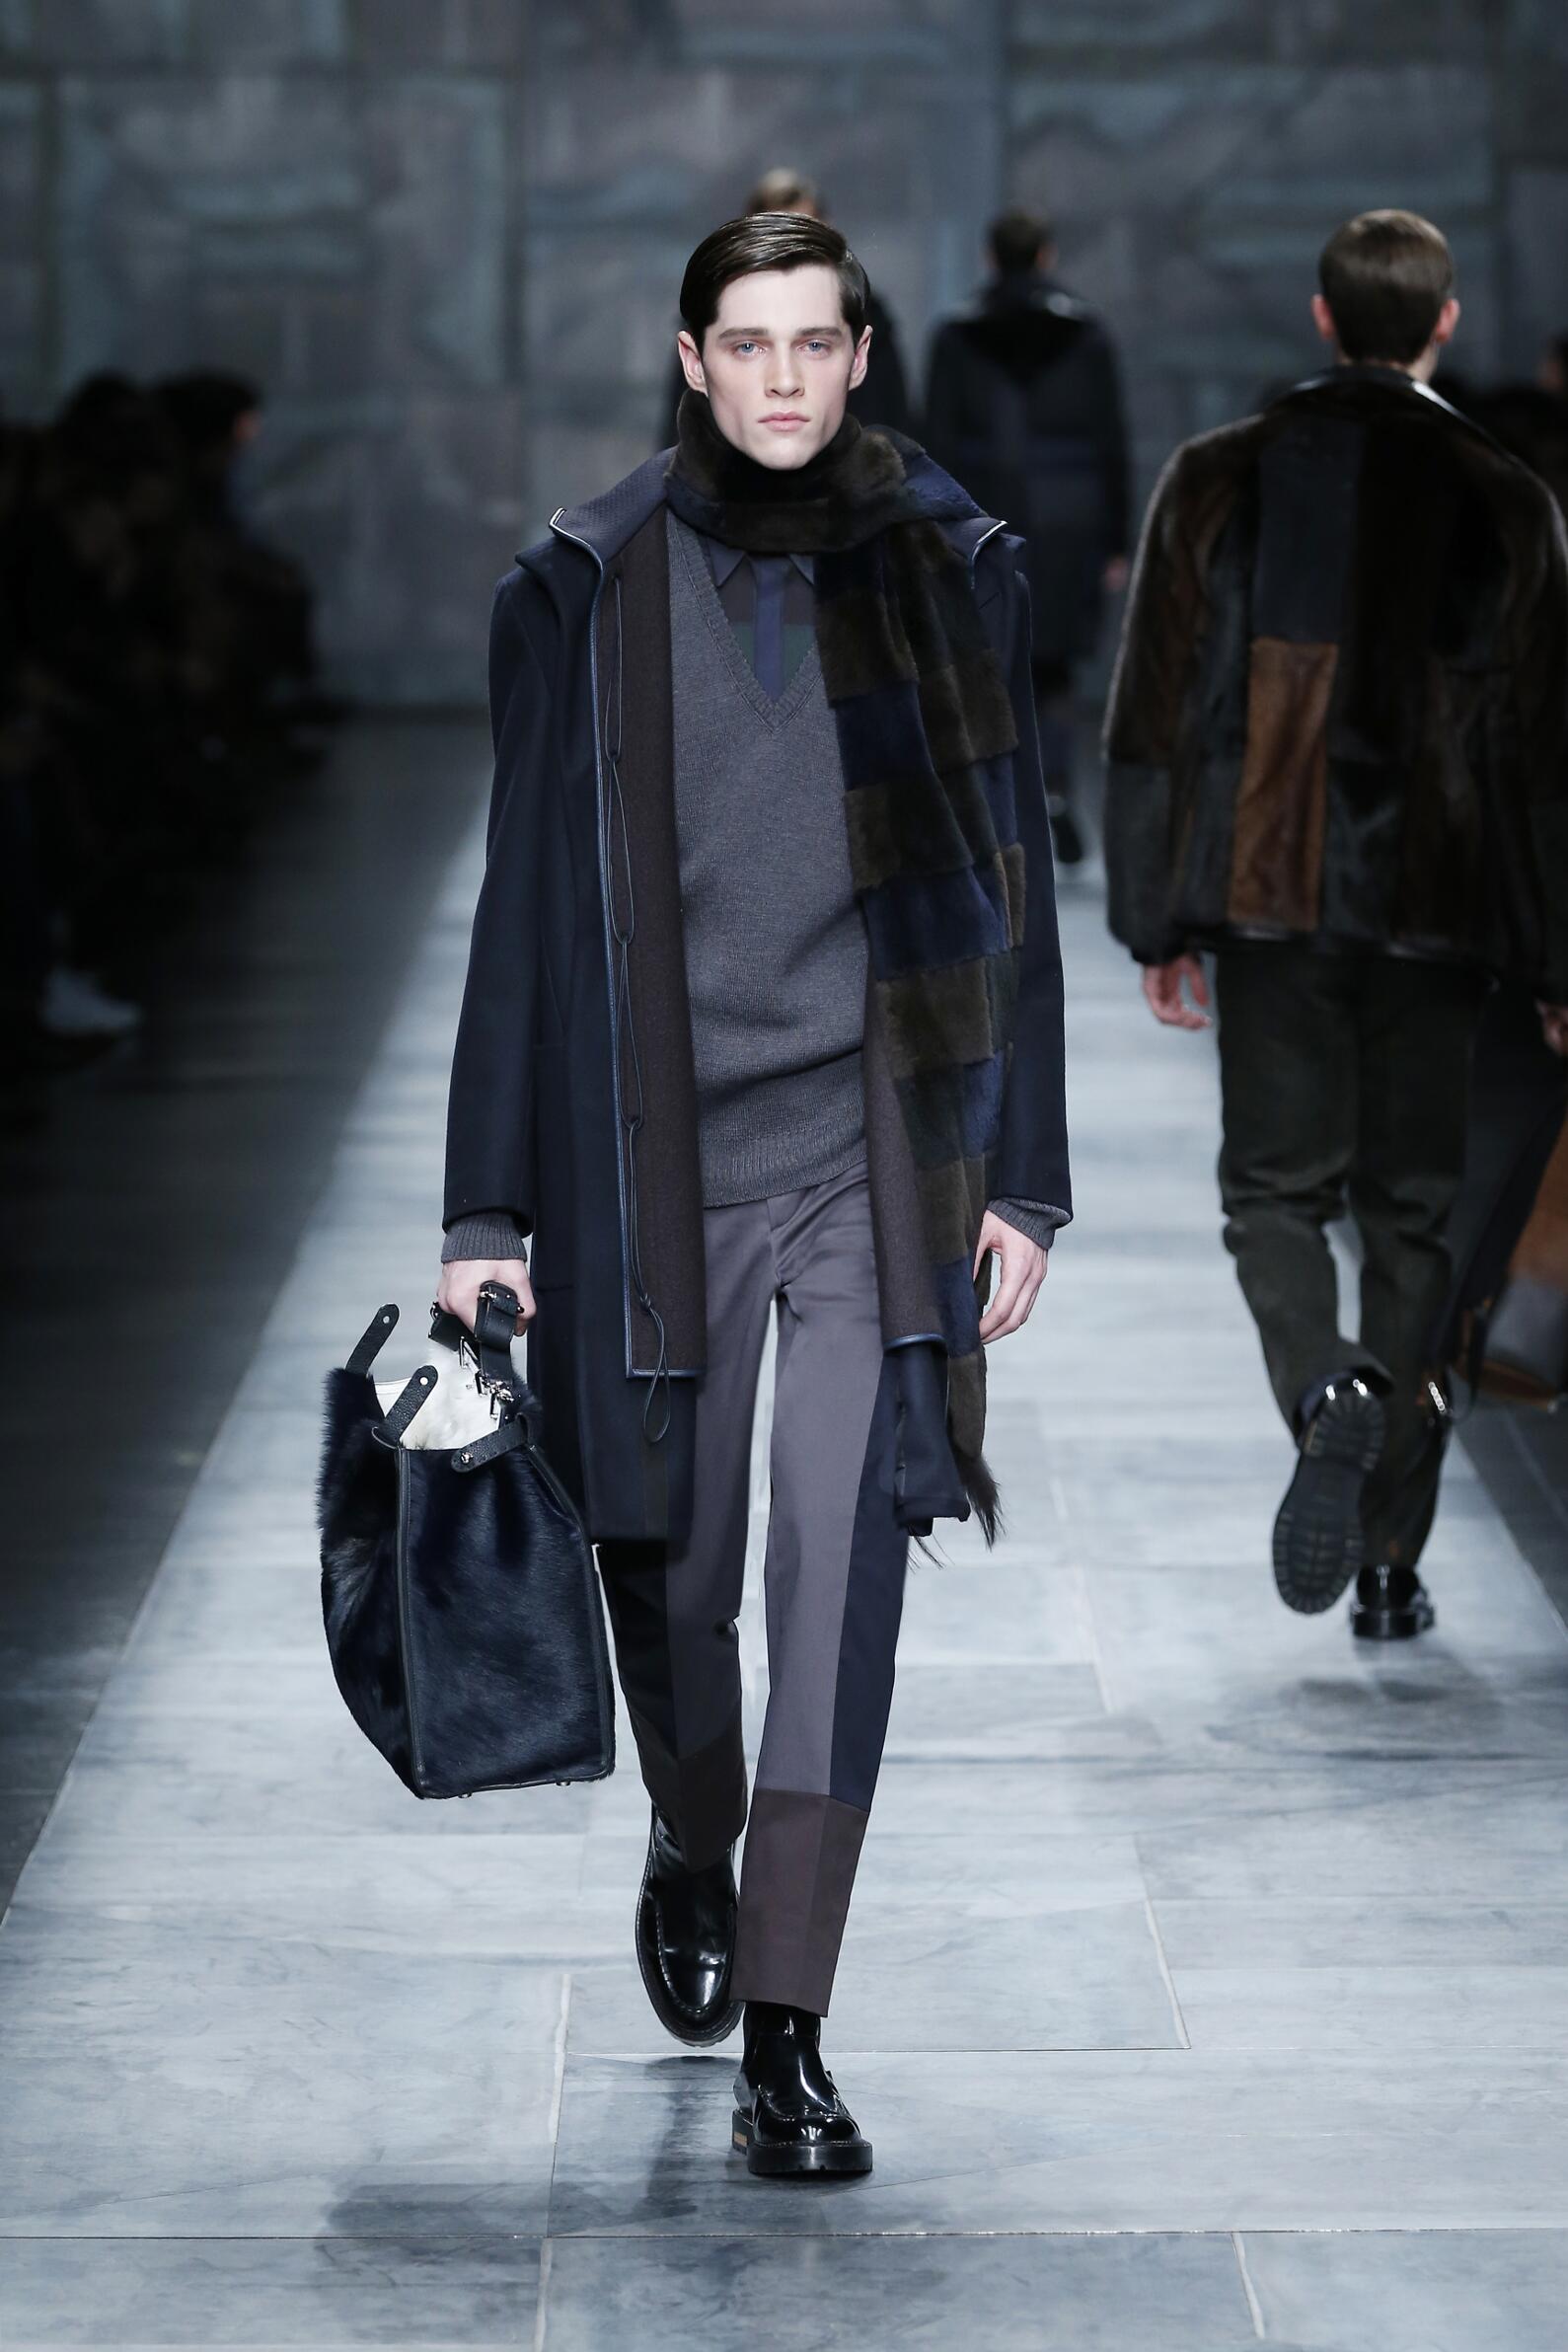 FENDI FALL WINTER 2015-16 MEN'S COLLECTION | The Skinny Beep